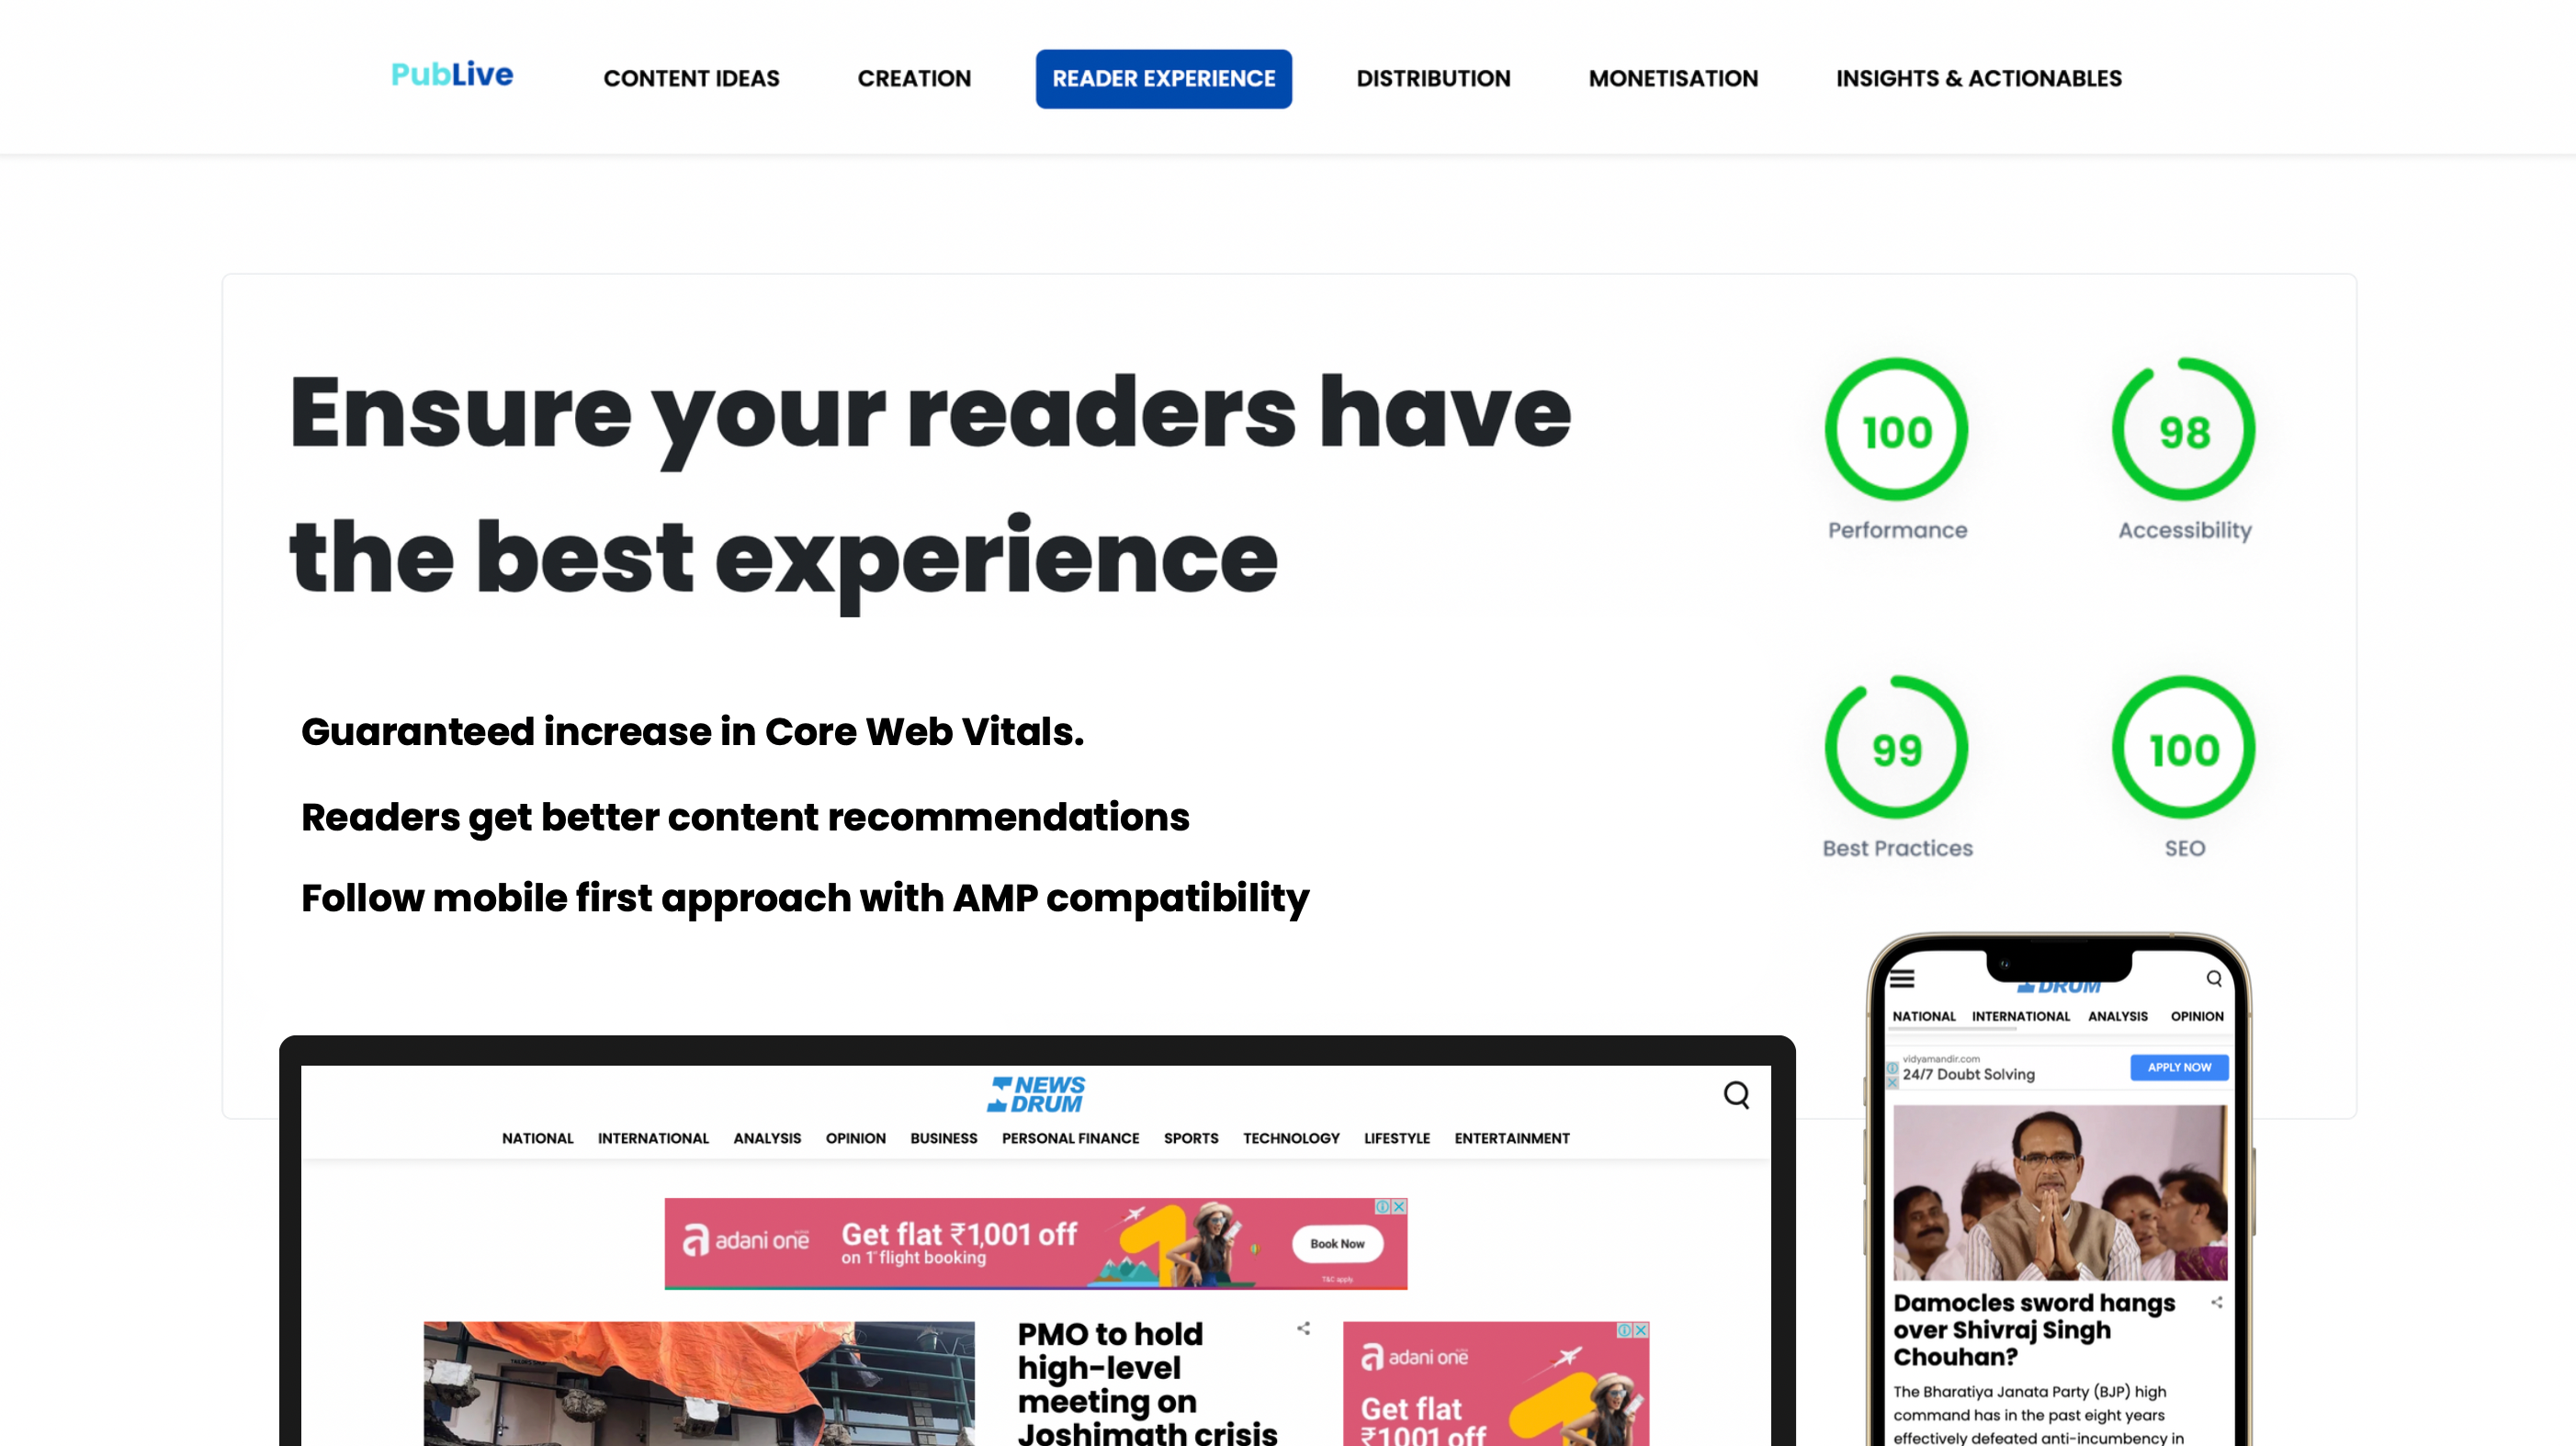 Ensure your readers have the best experience